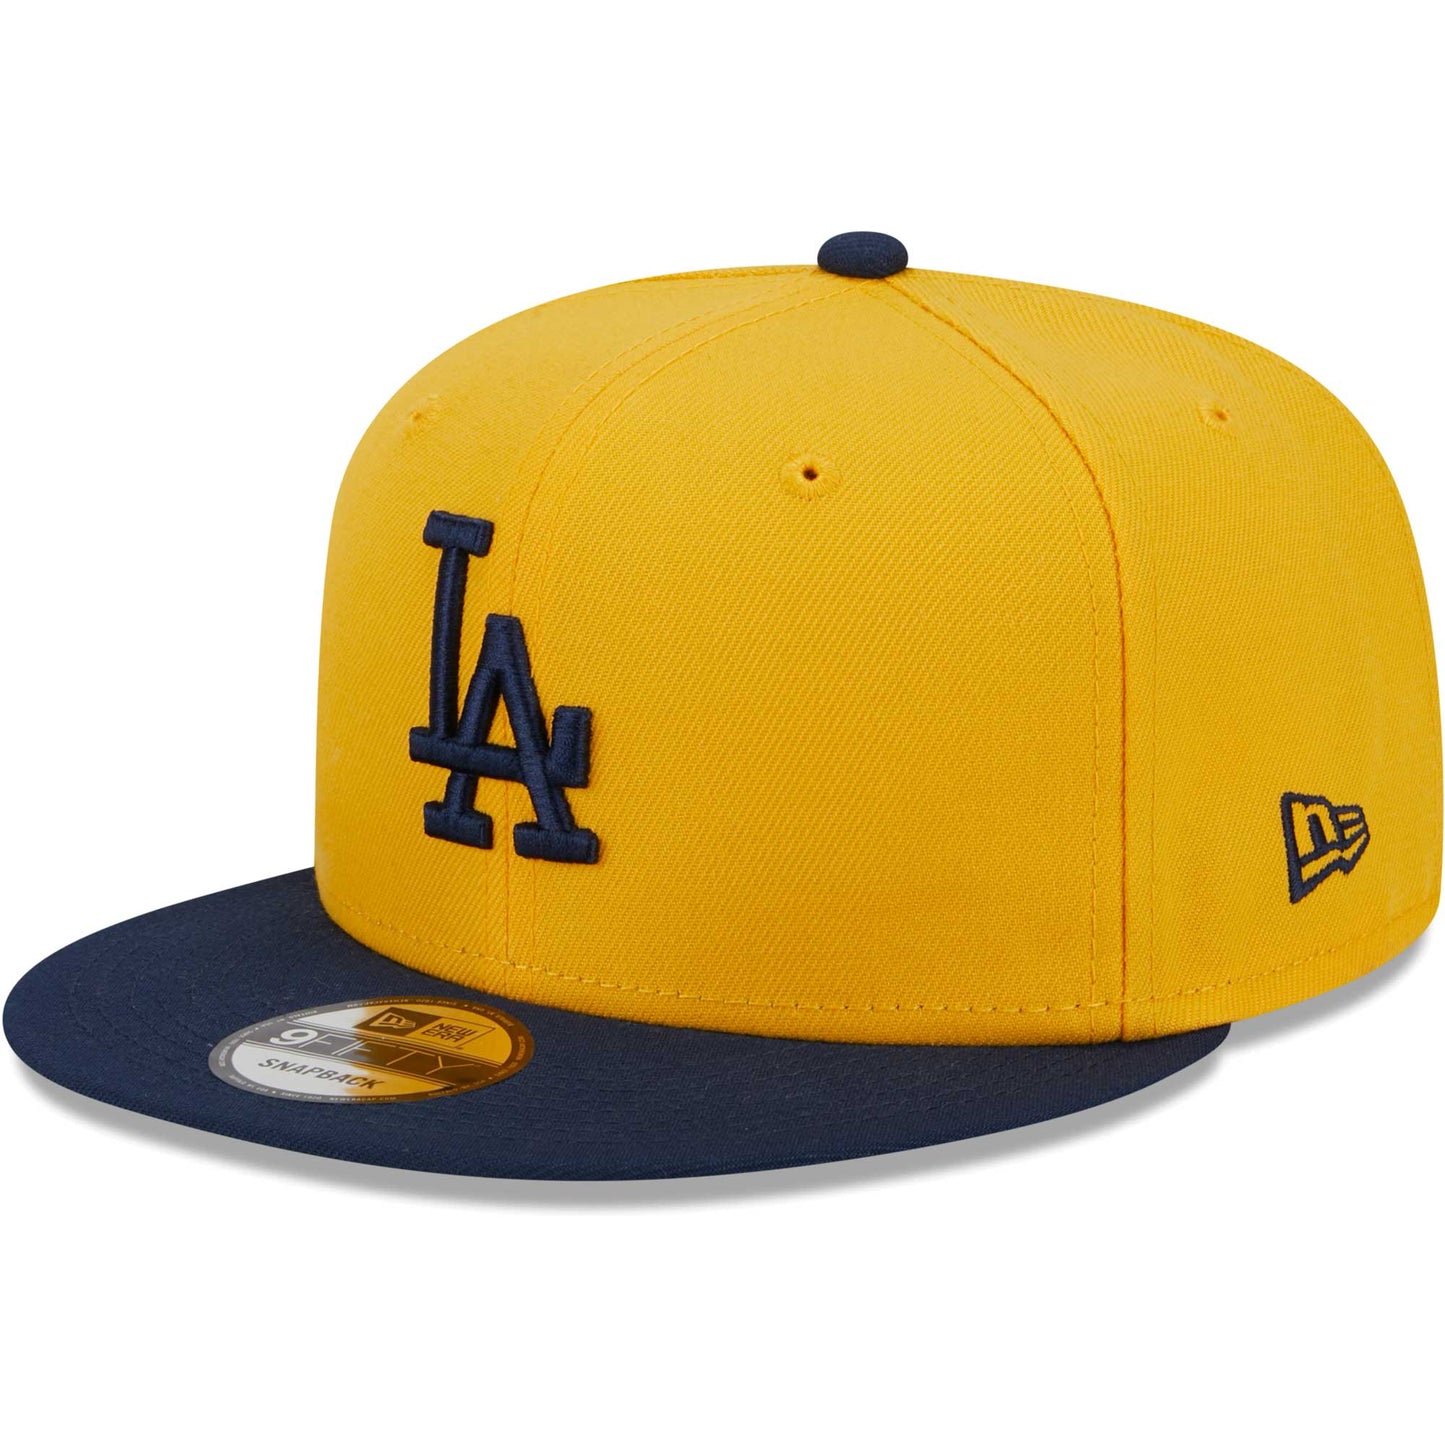 Los Angeles Dodgers New Era Two-Tone Color Pack 9FIFTY Snapback Hat - Gold